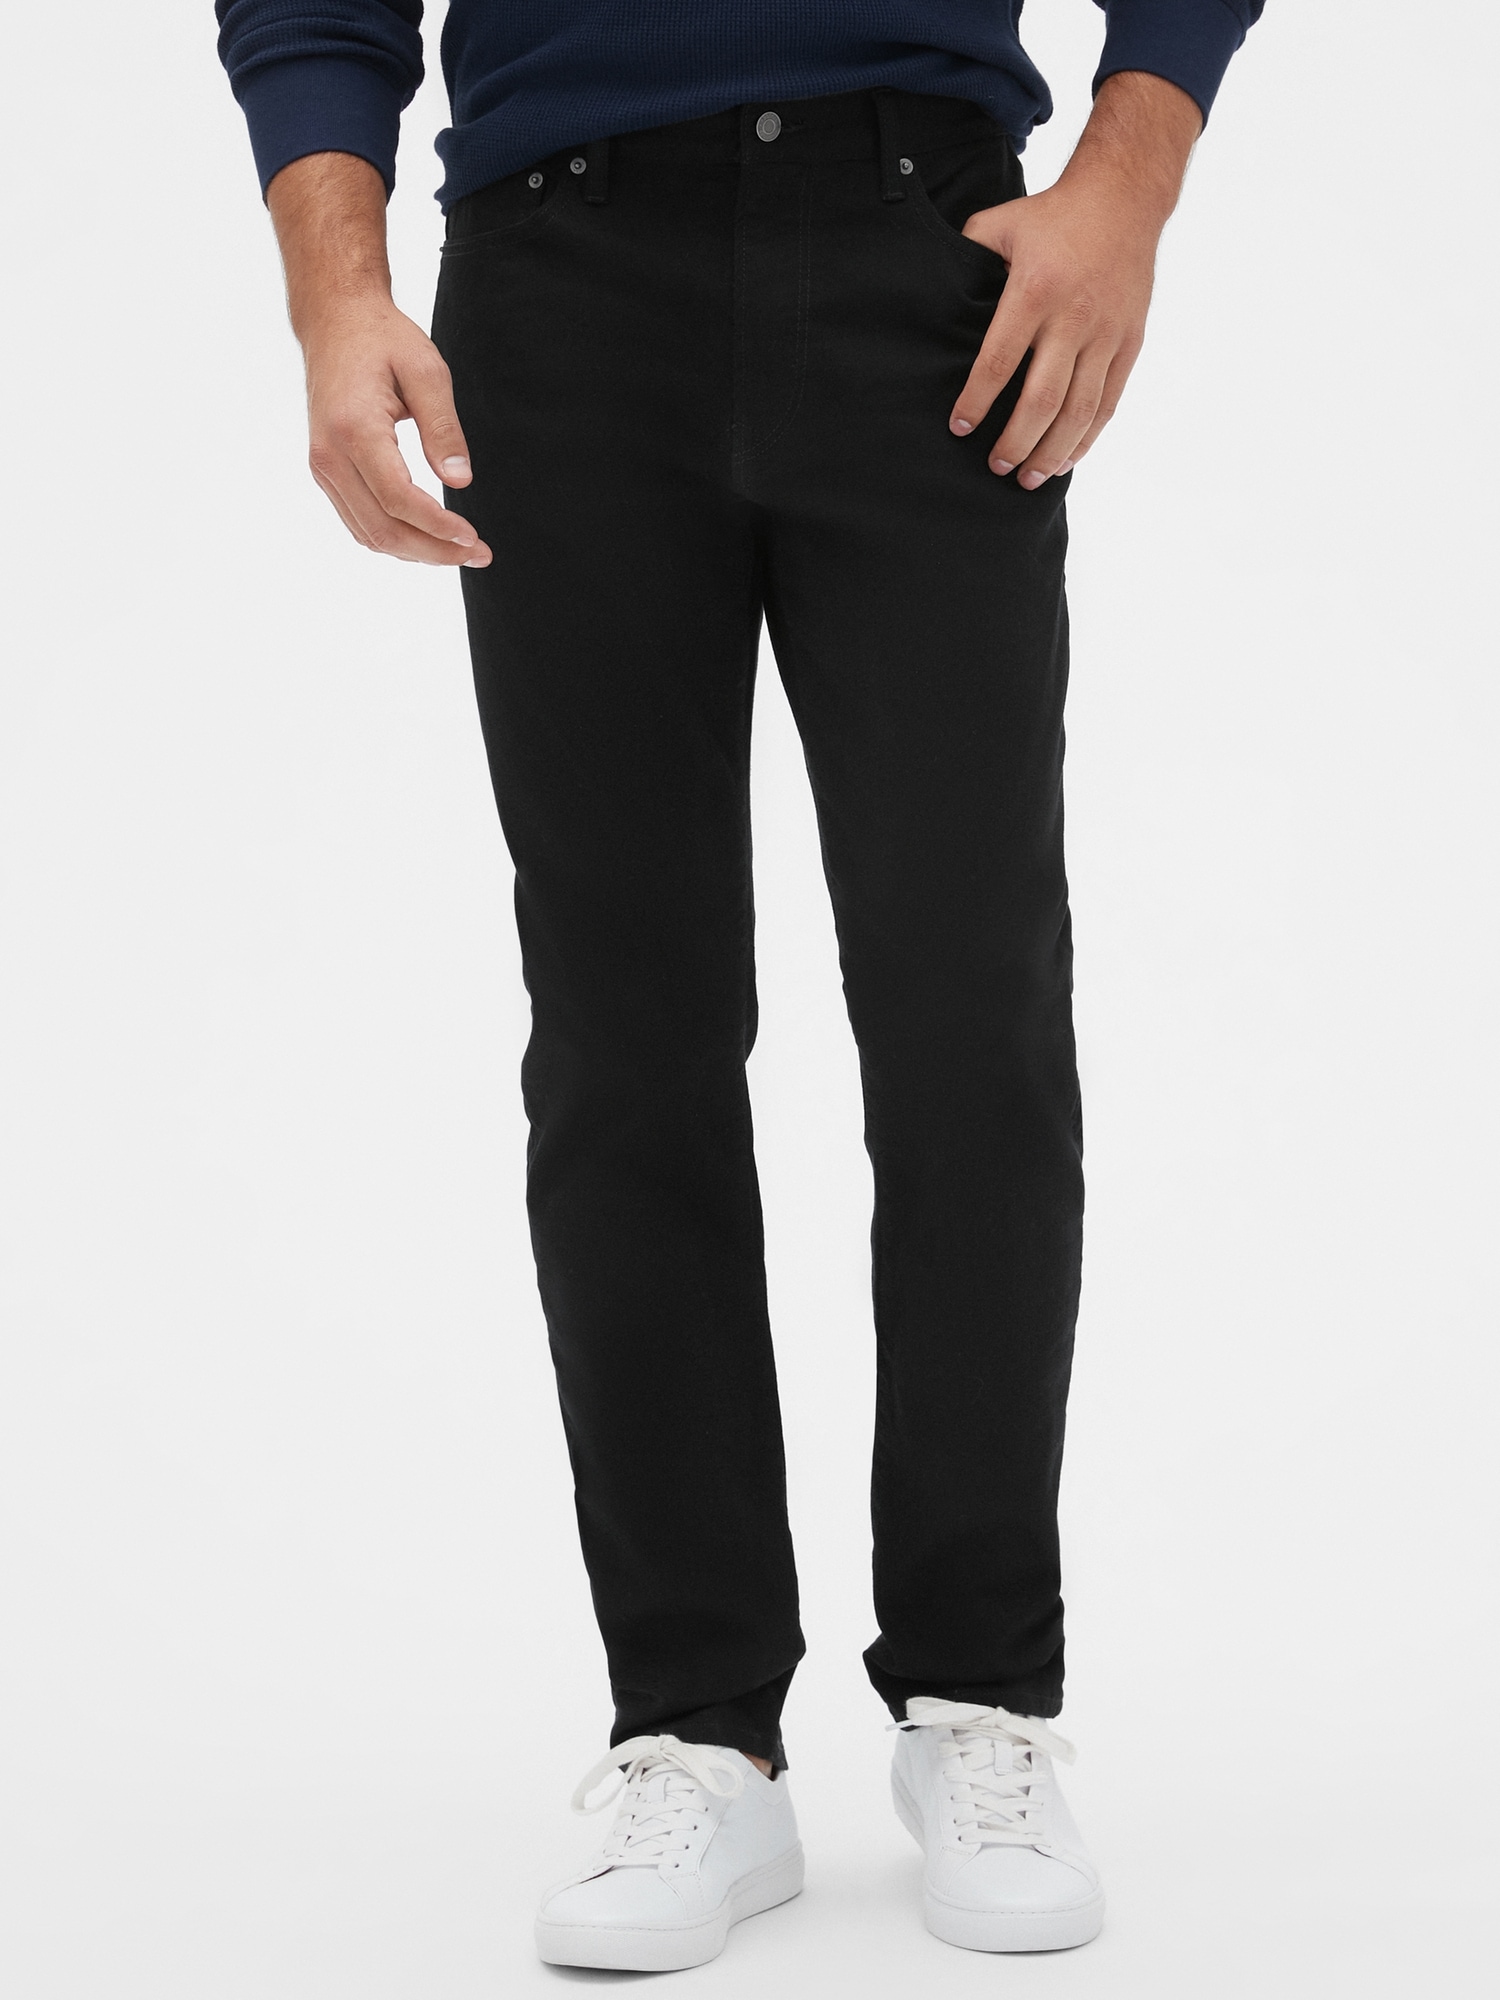 Athletic Taper Jeans with GapFlex | Gap Factory